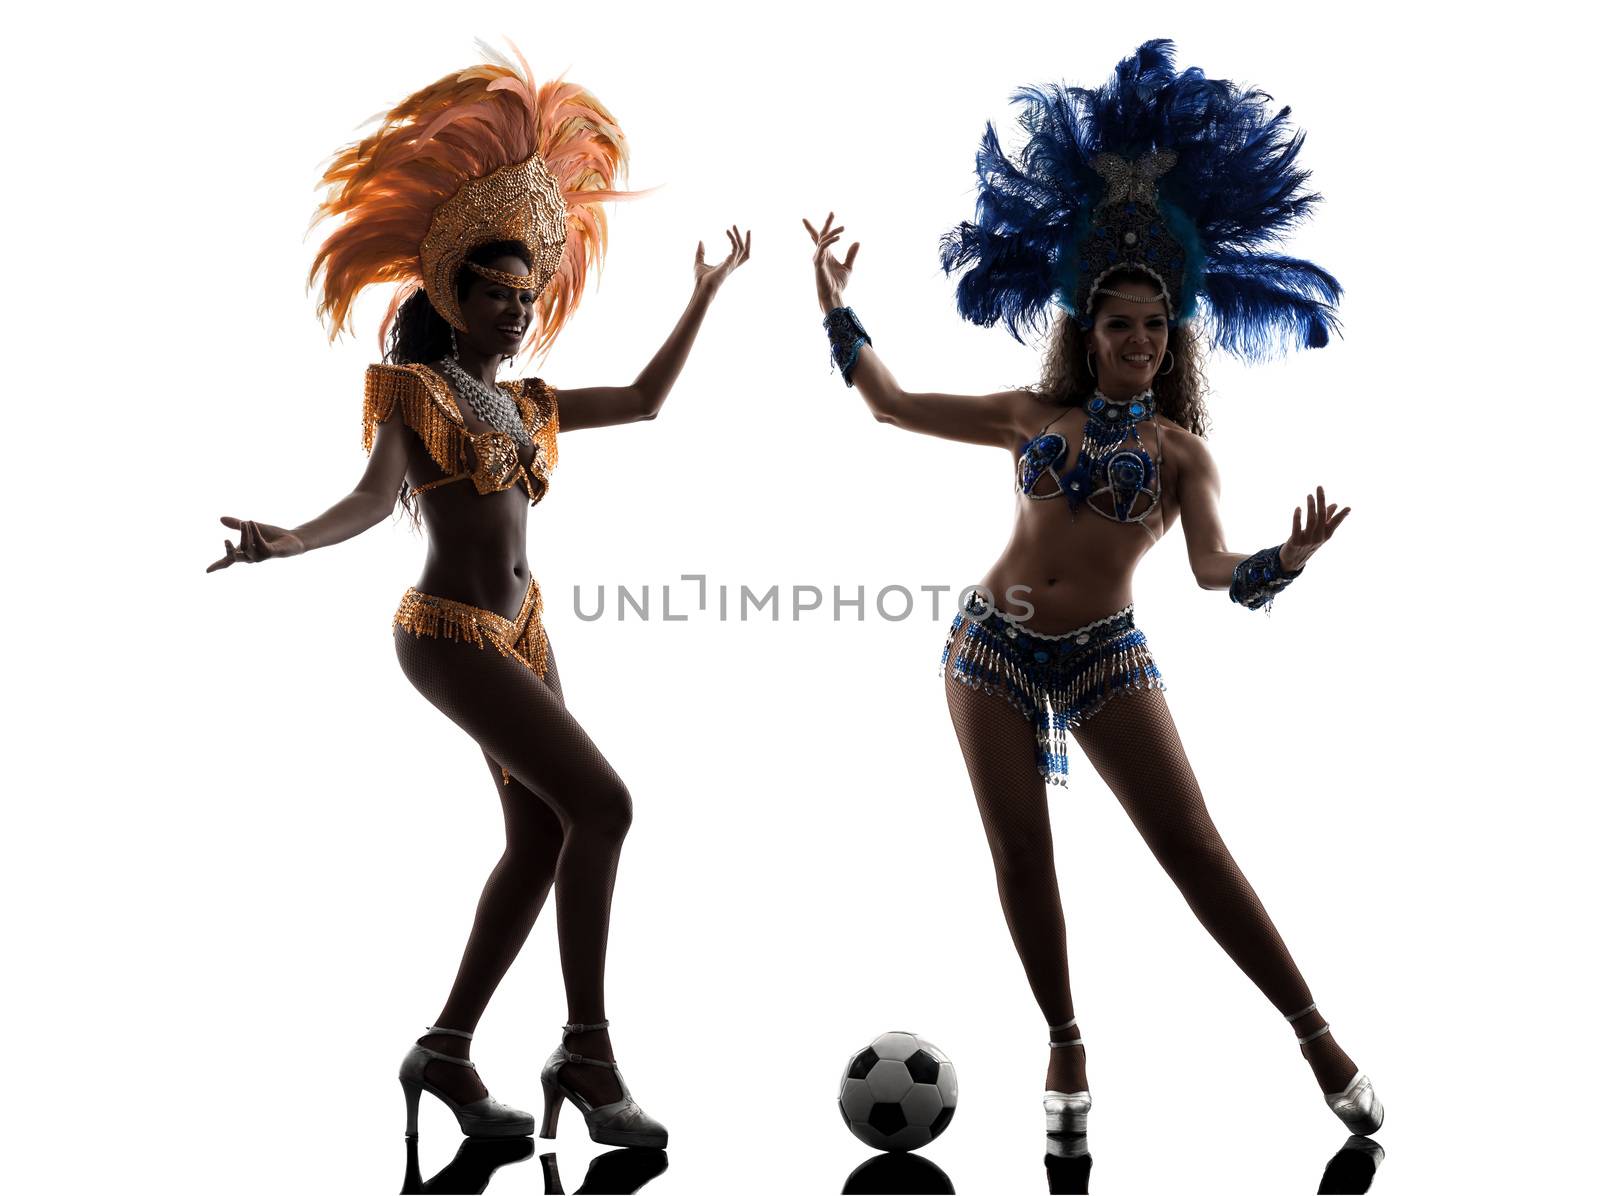 two women samba dancer playing soccer silhouette on white background